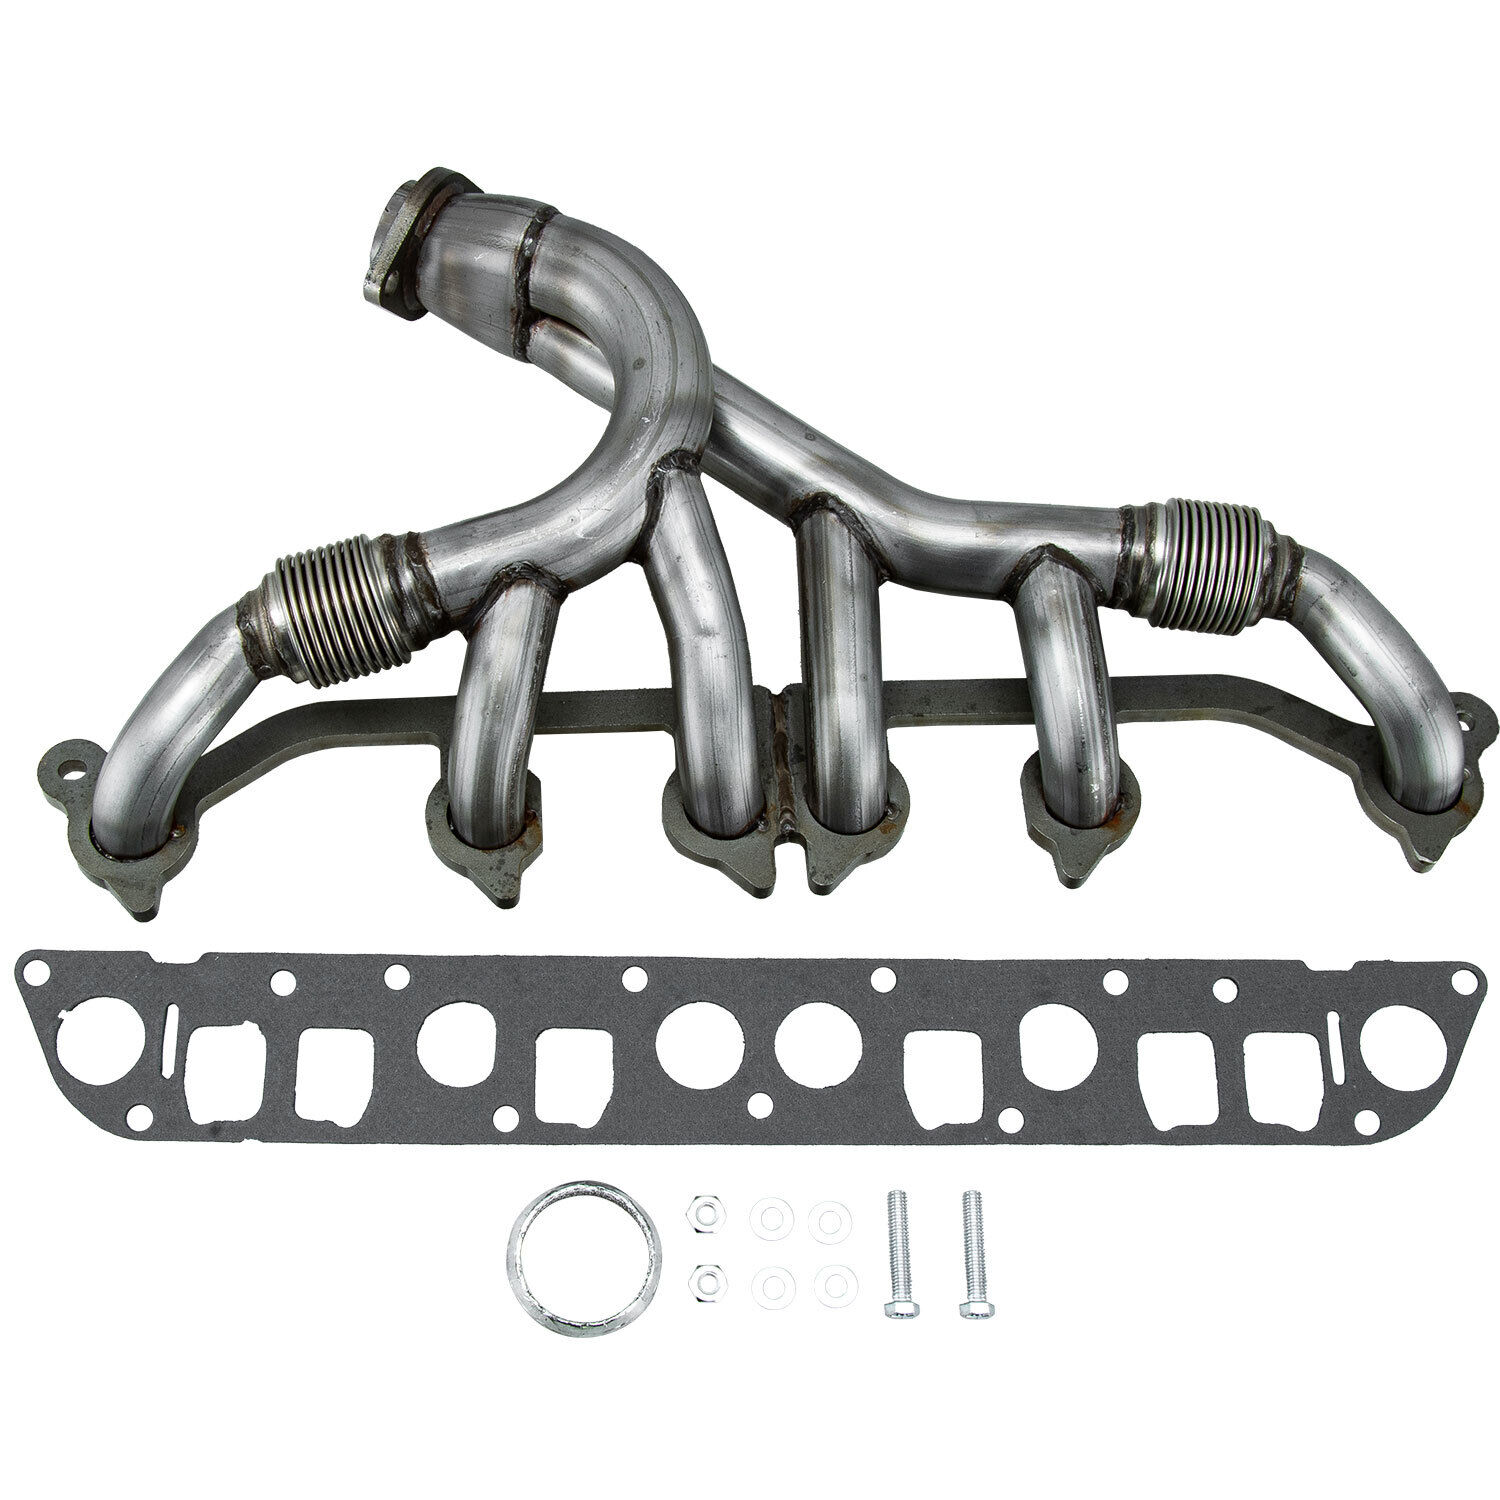 Exhaust Manifold & Gasket Kit fit 1991-99 Jeep Wrangler Comanche Grand Cherokee